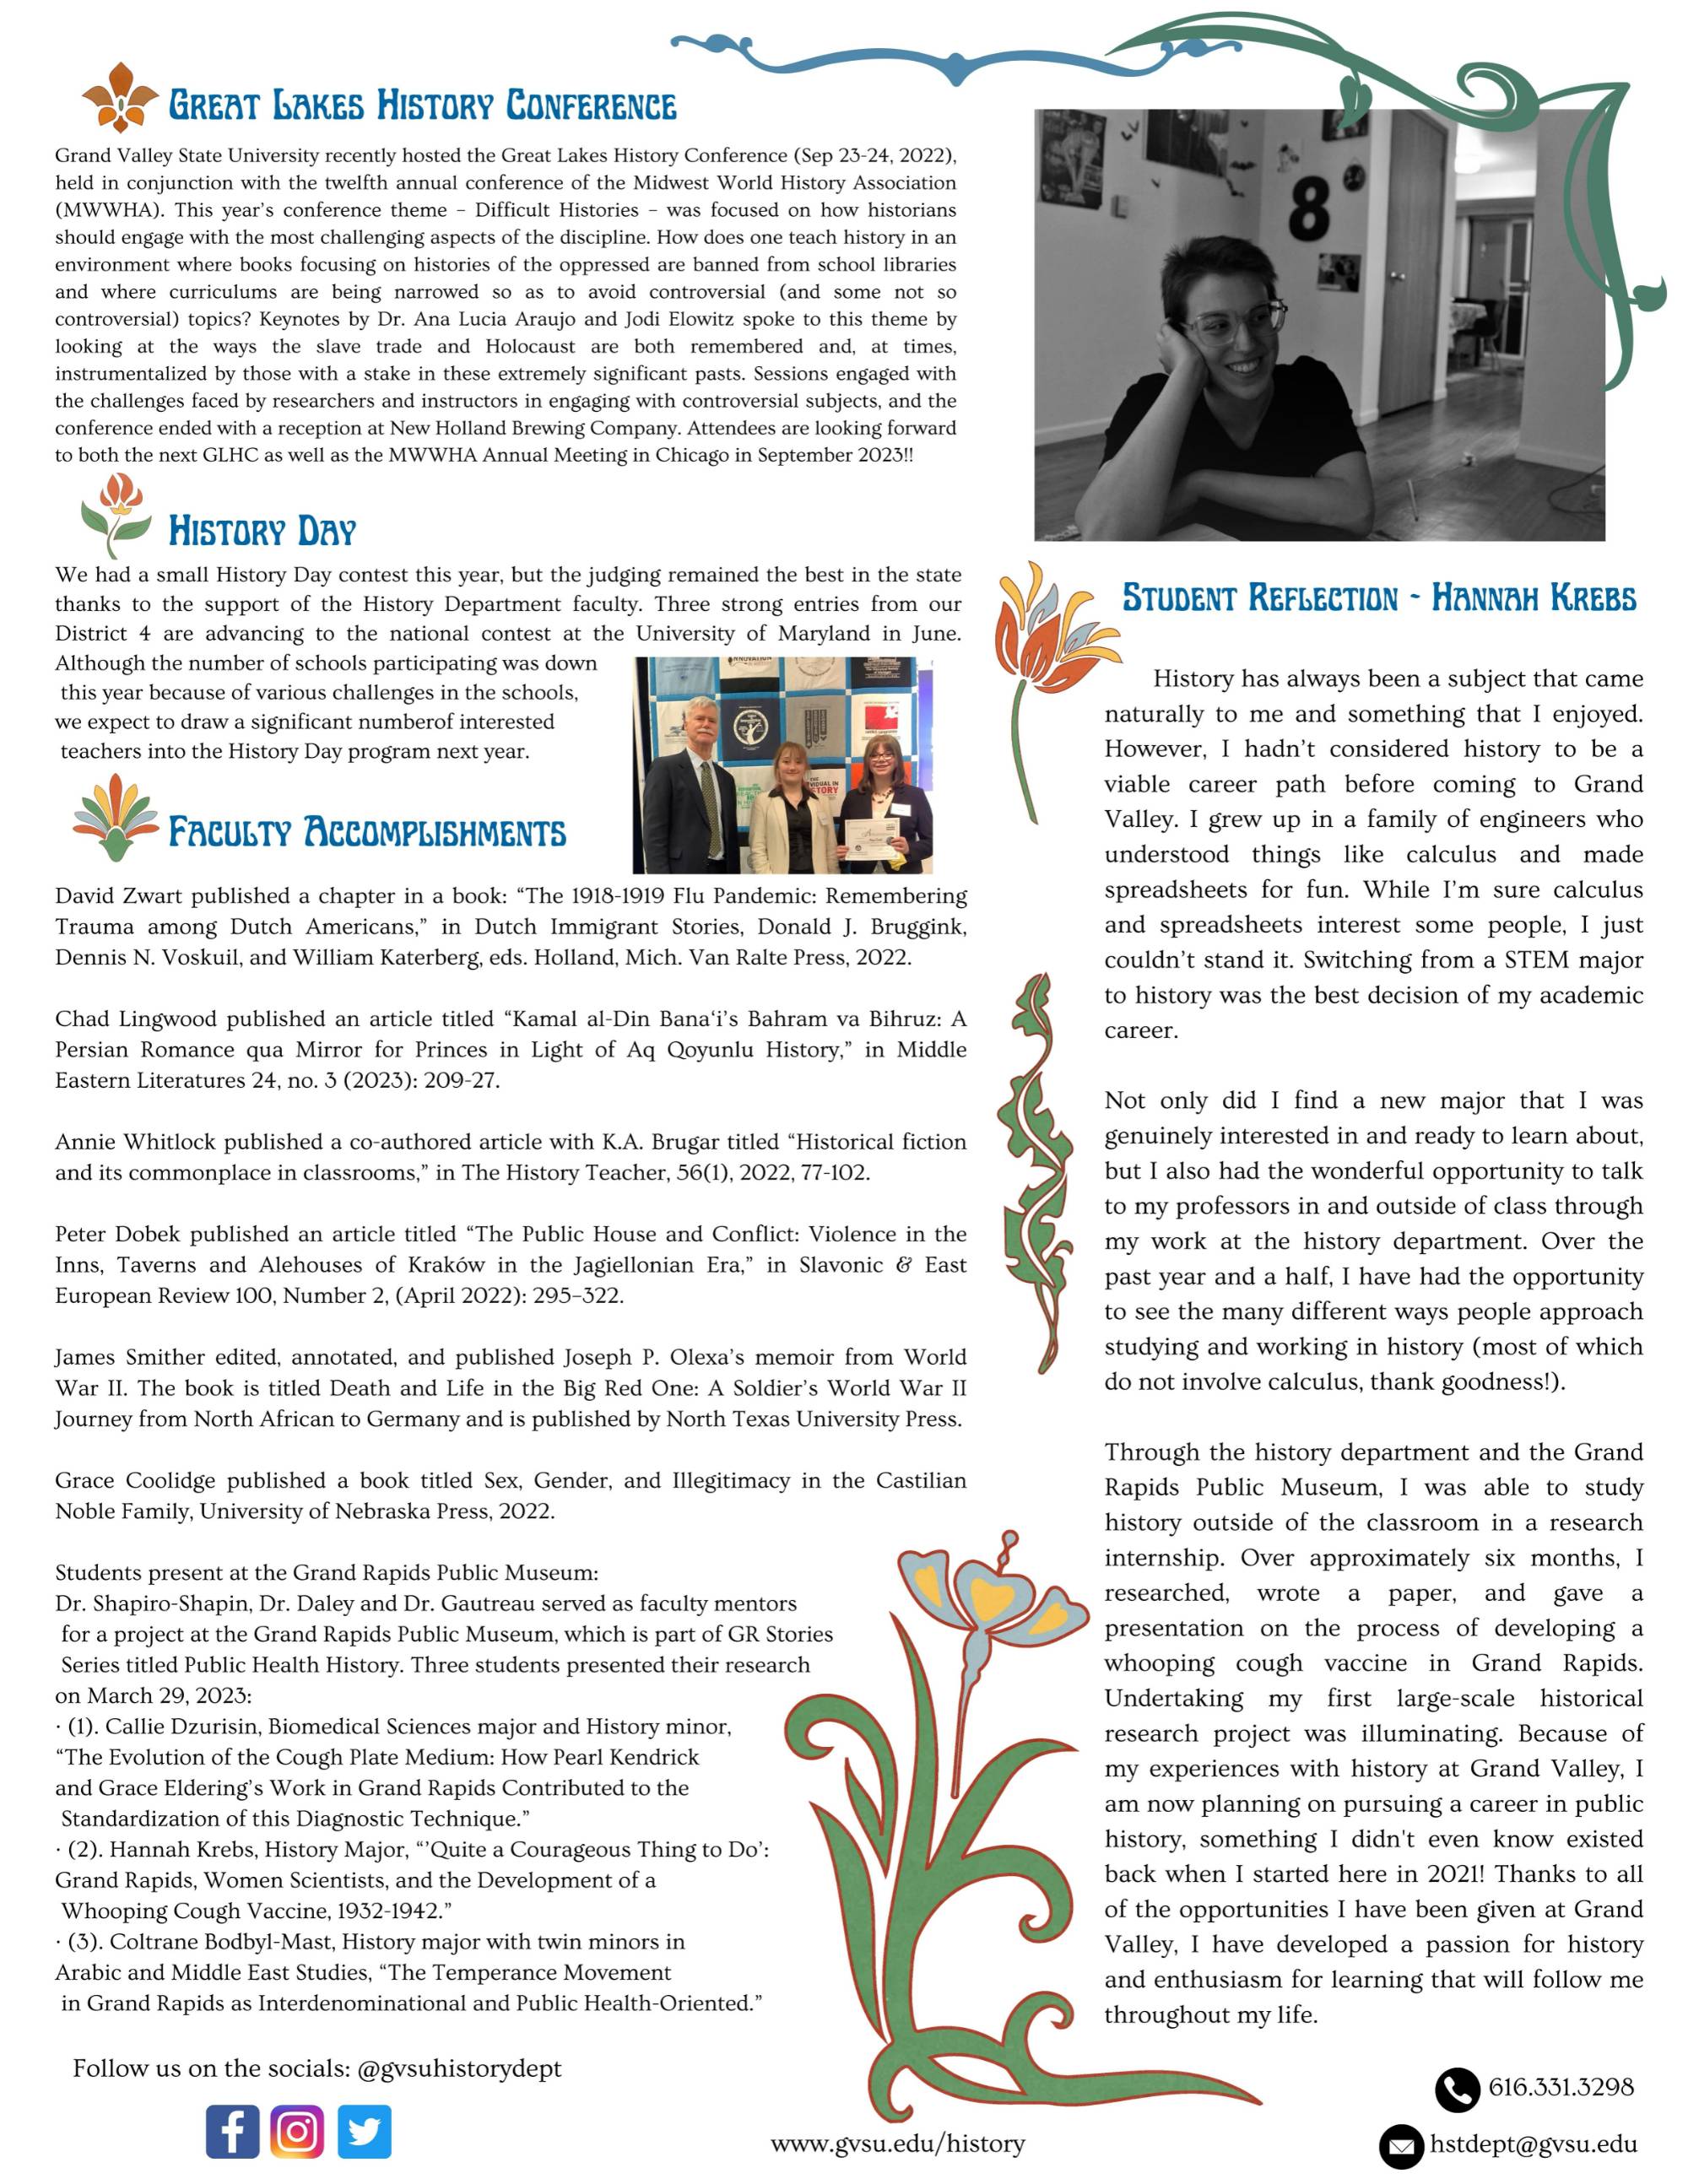 History Highlights page 2